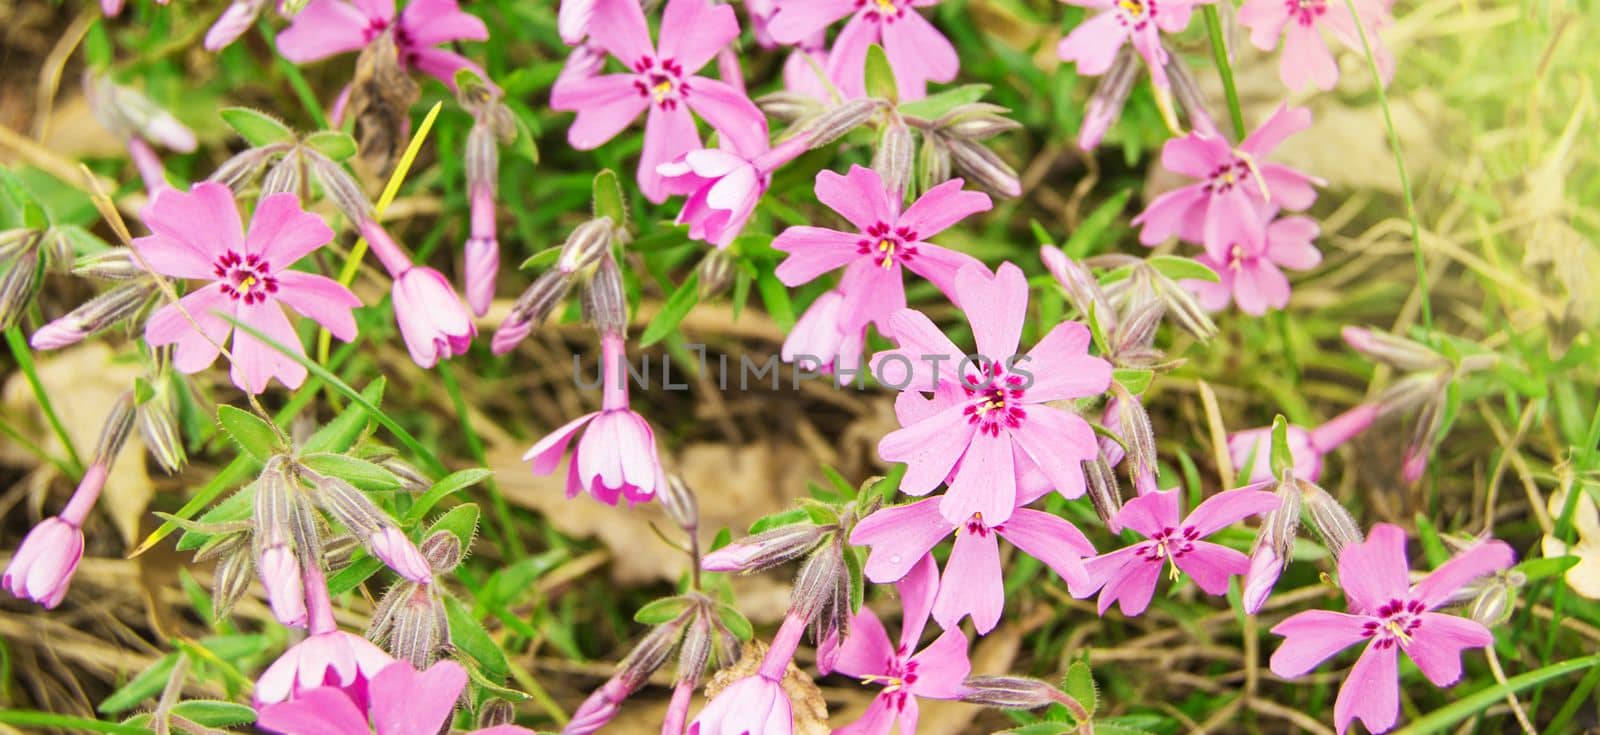 Phlox subulata, Phlox pink Flowers in the garden in summer in sunlight, floral background by claire_lucia